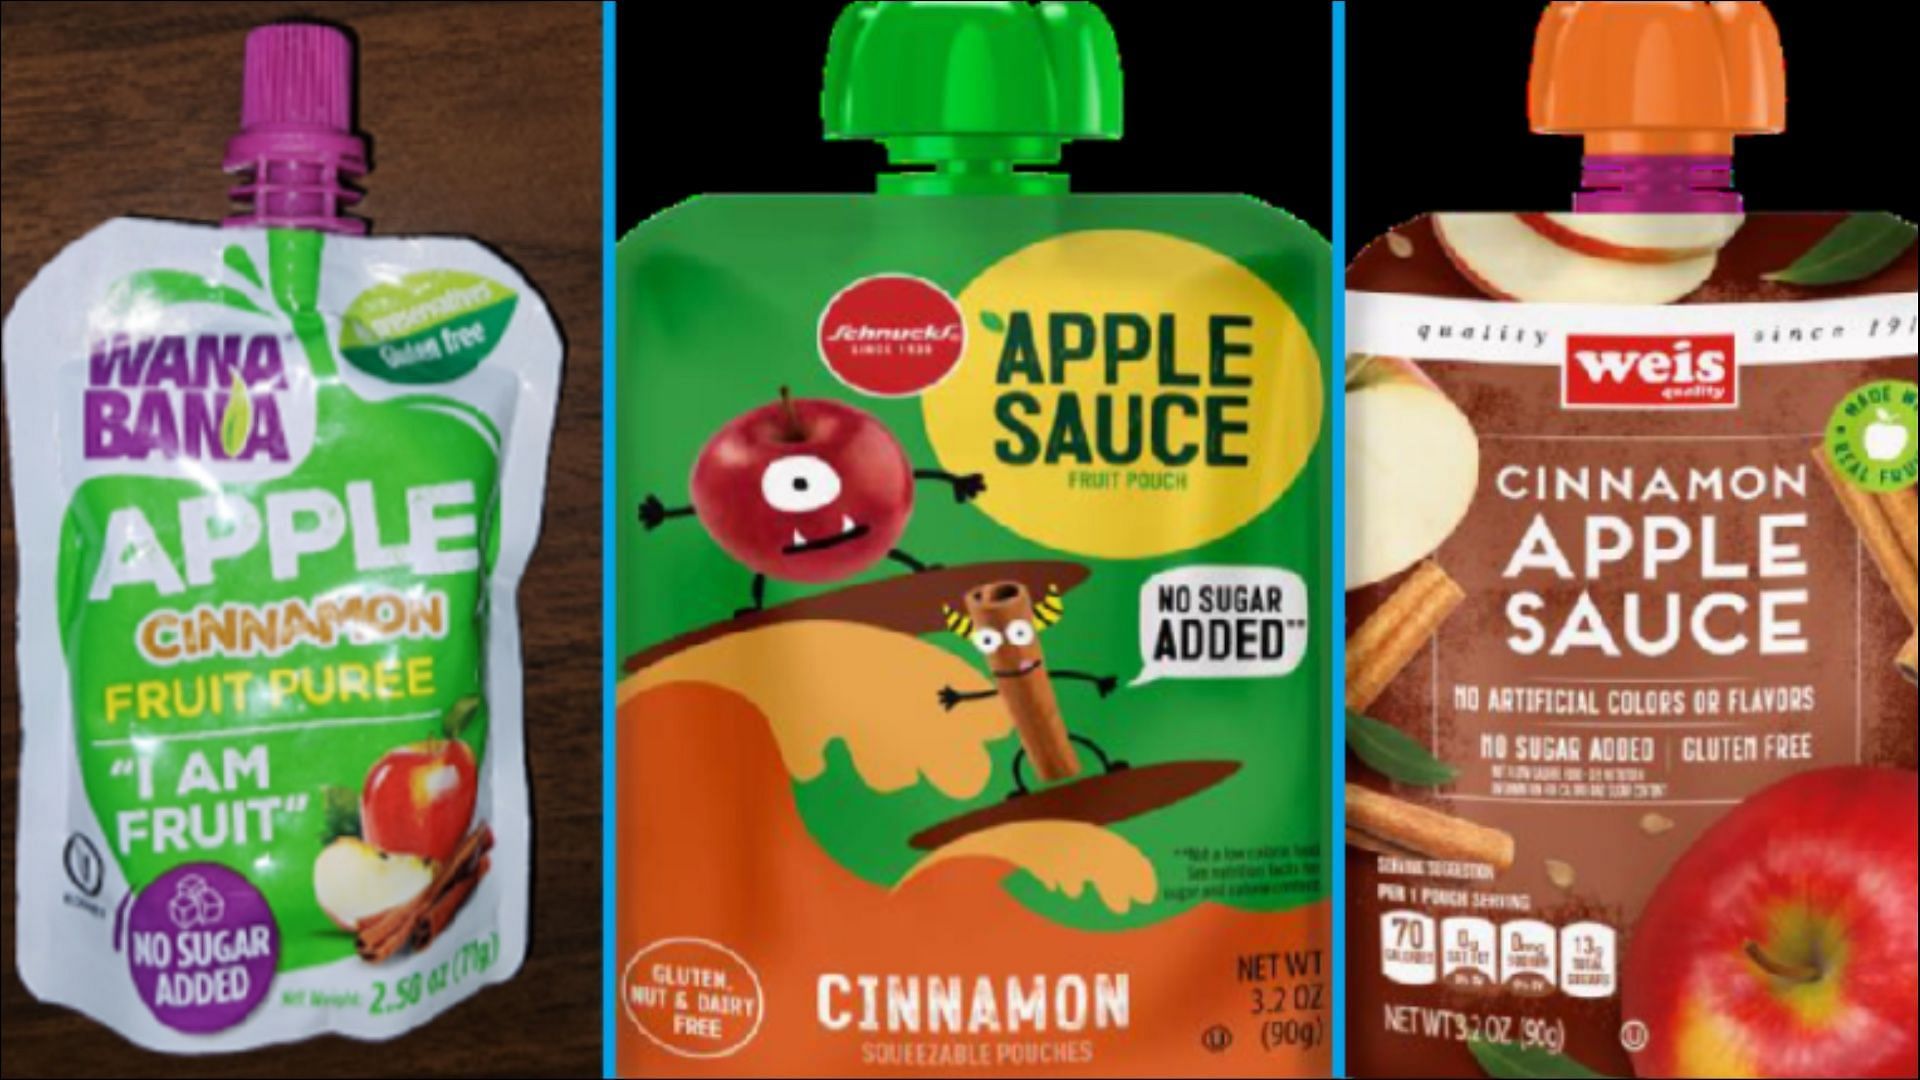 FDA extends the applesauce recall to include two more products (Image via FDA)